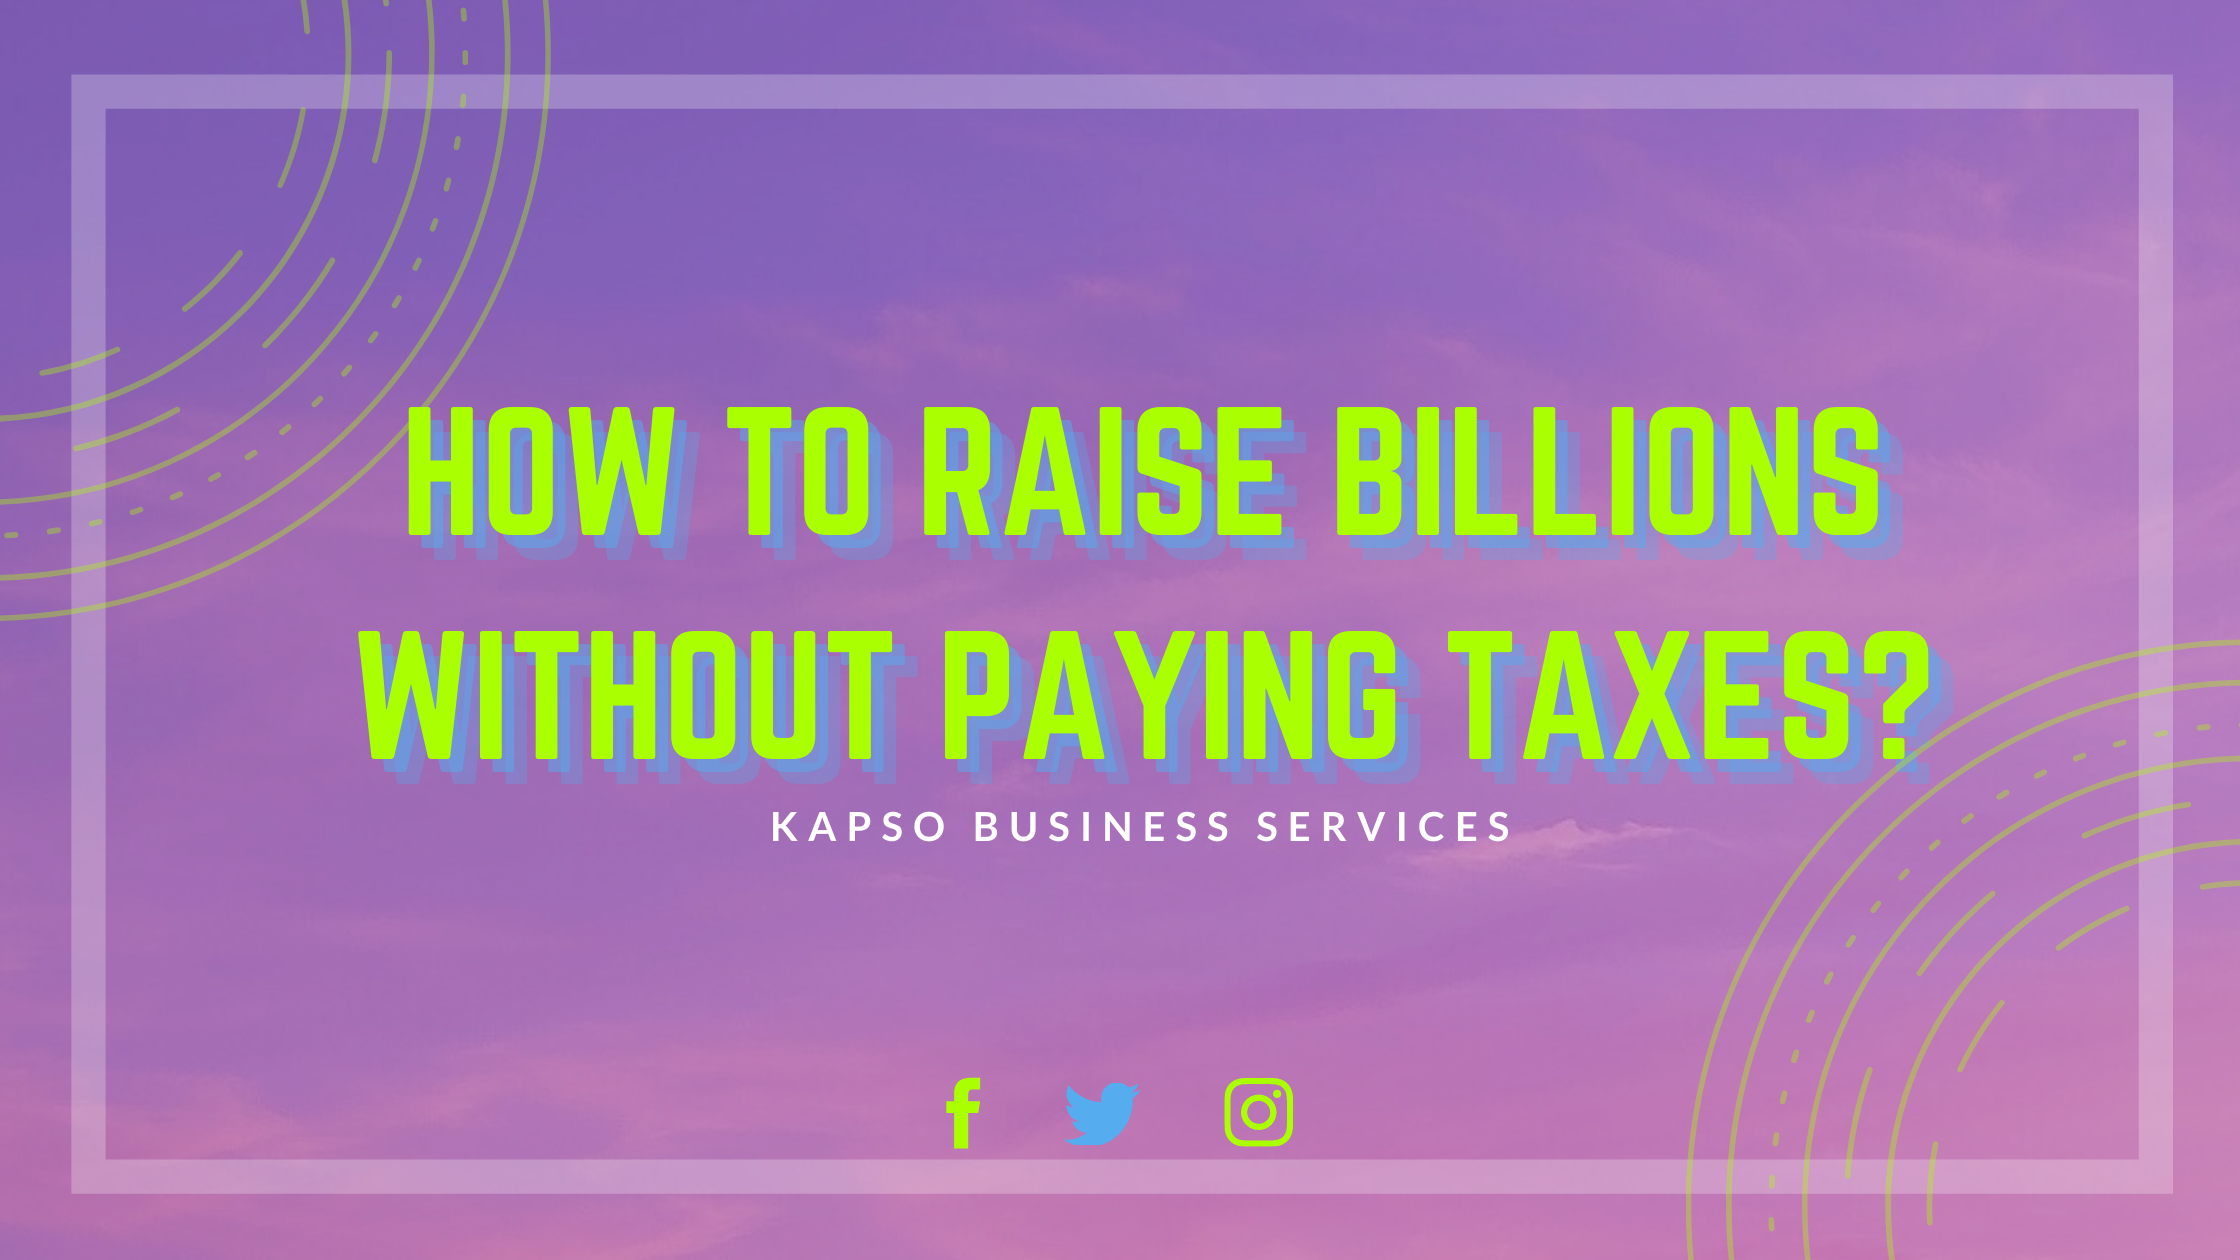 Raise billions without paying taxes : RIL & Jio